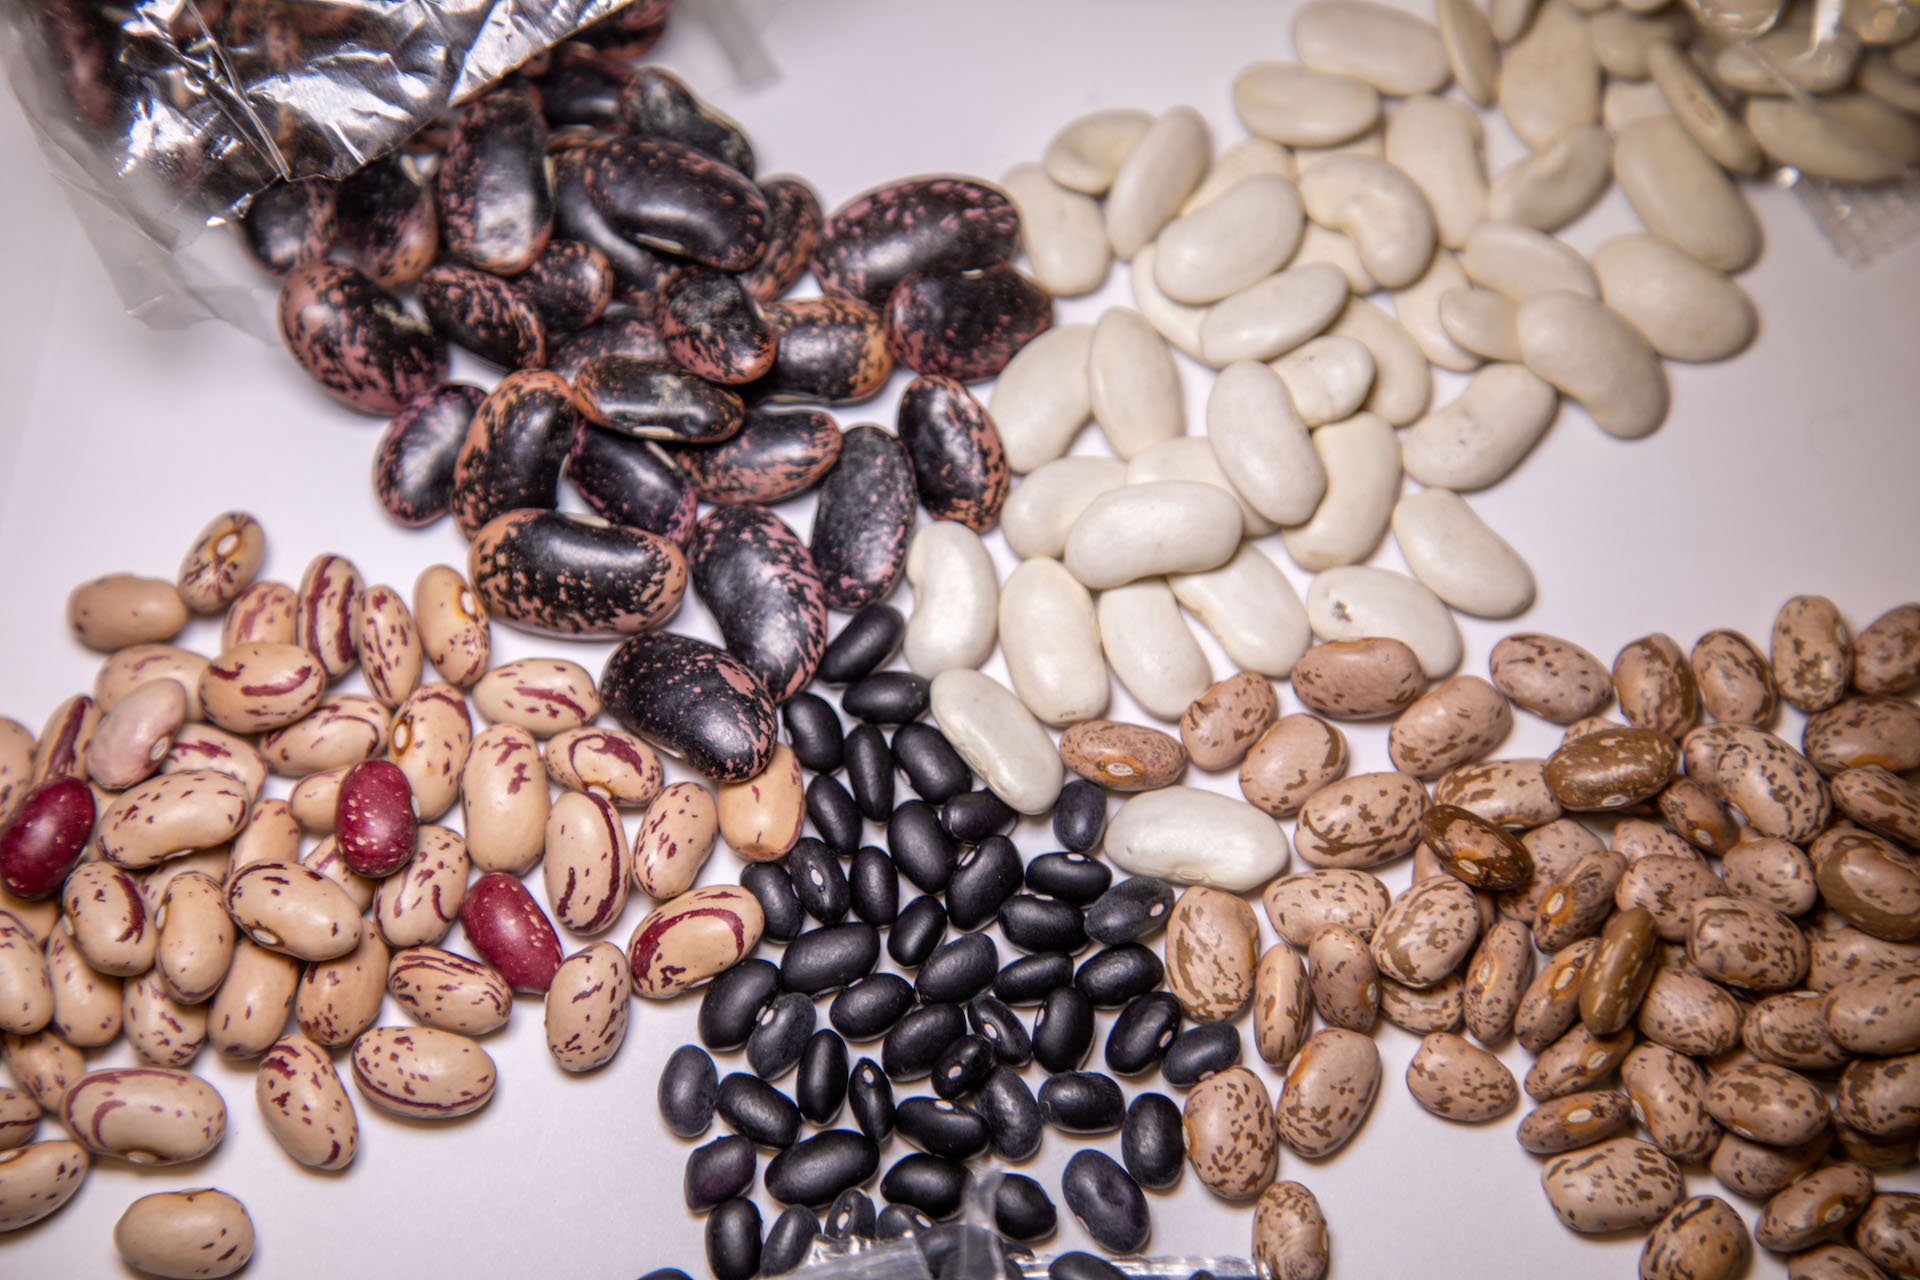 A few varieties of beans from Rancho Gordo's heirloom farm including pinto, cranberry and scarlet runners. 